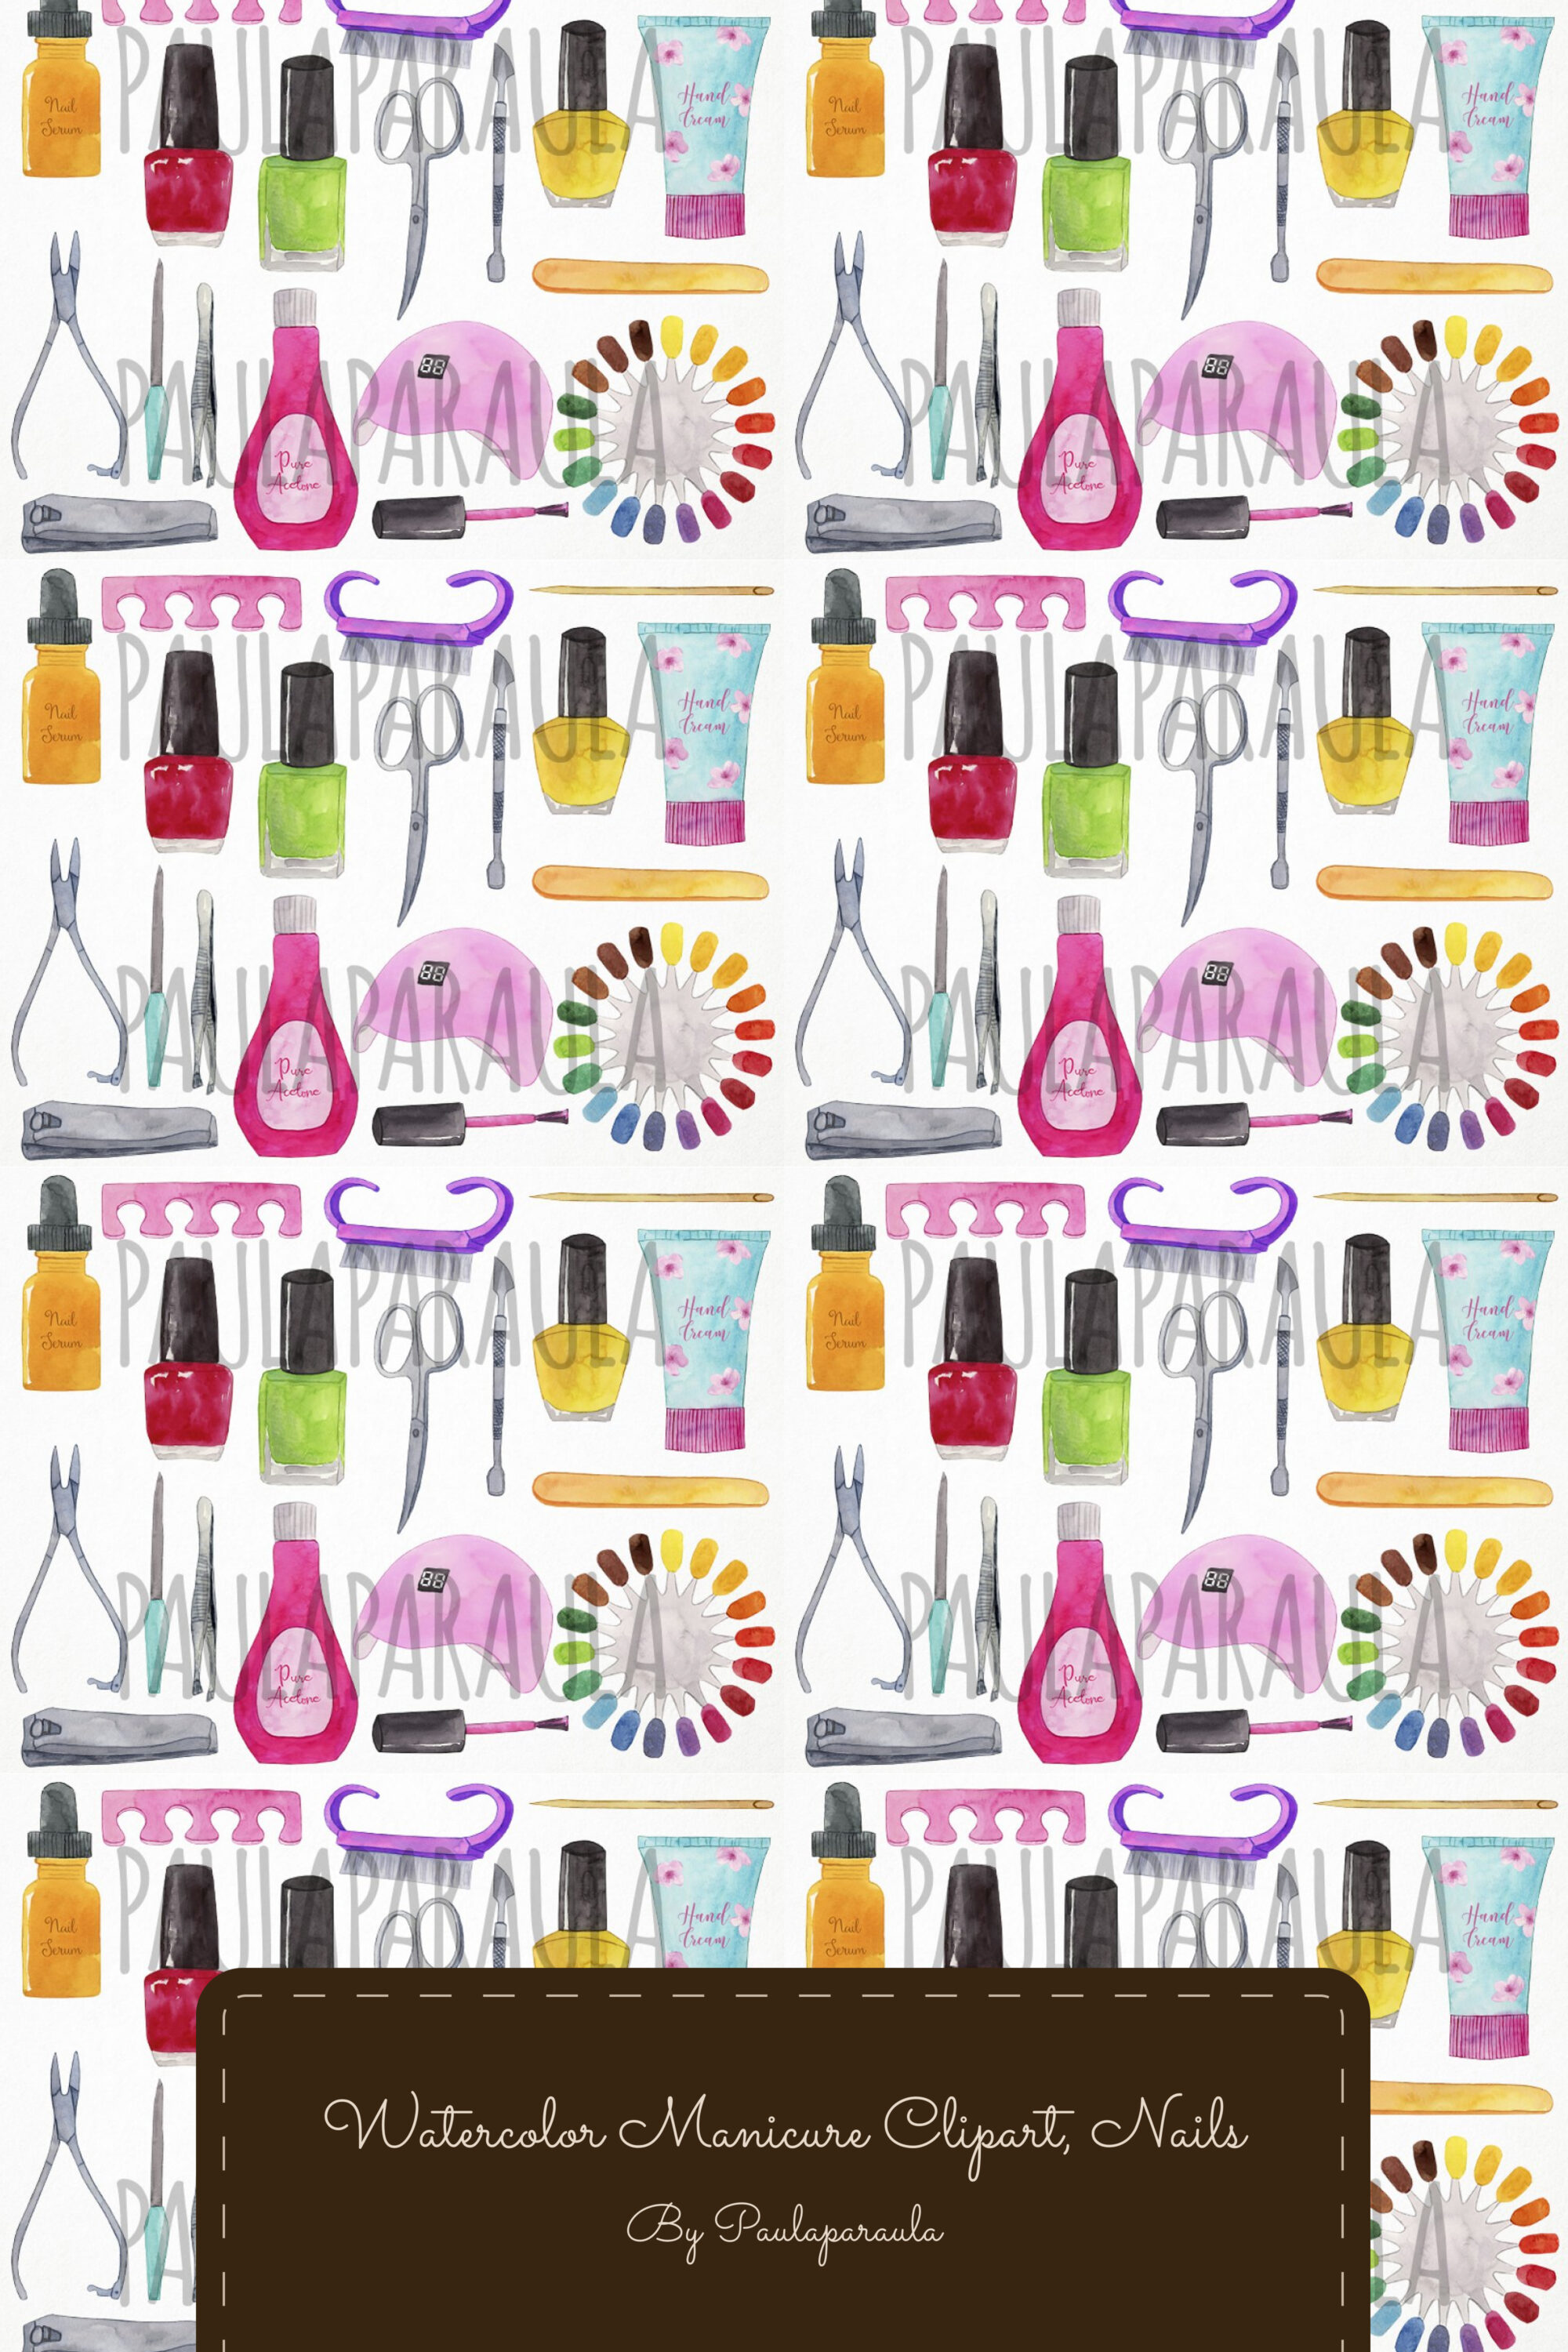 Different colors and tools for creating a manicure of pinterest.